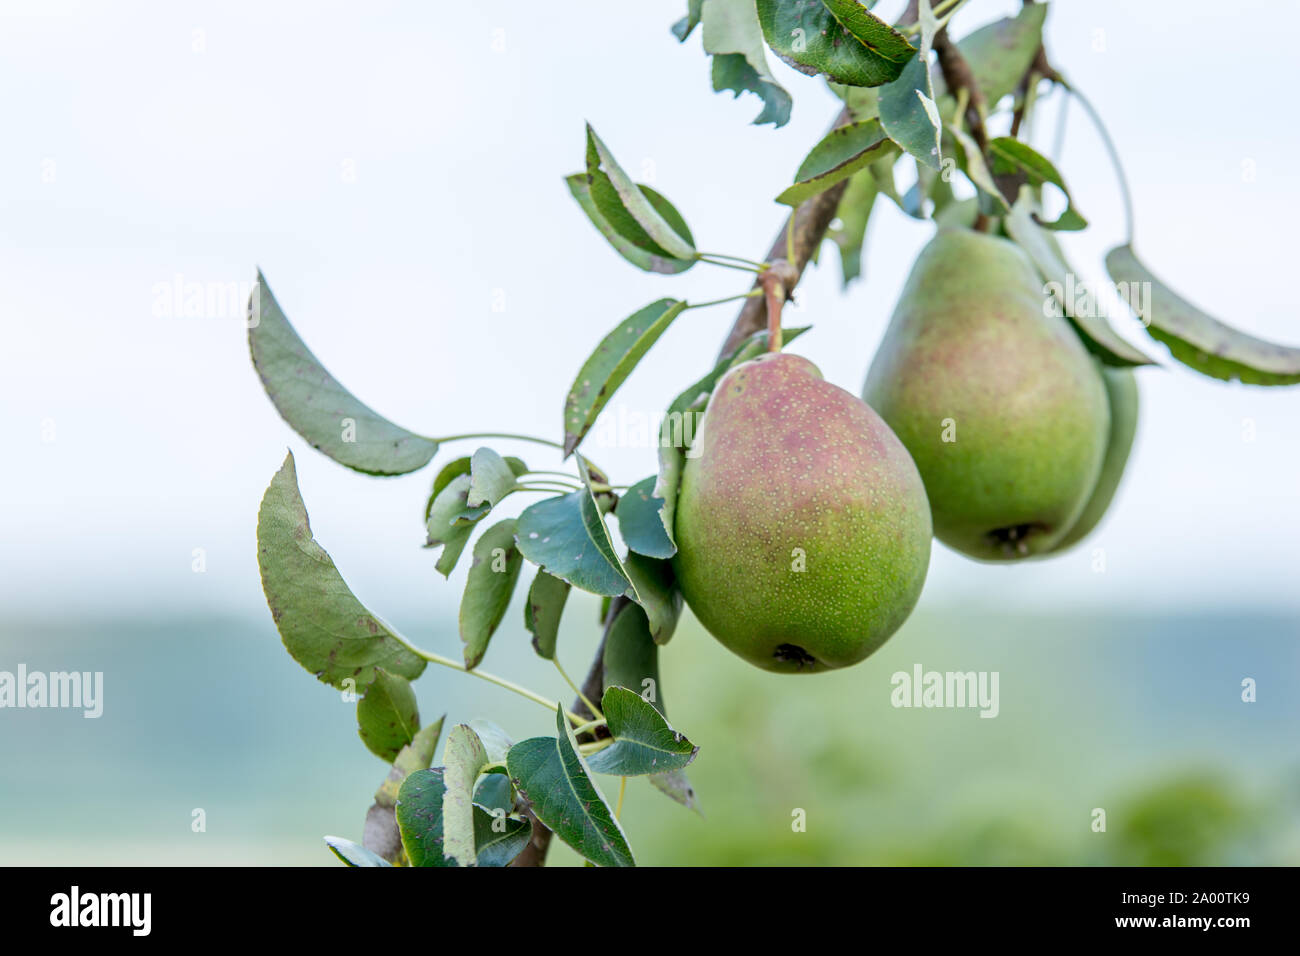 Fresh pears on the branch of a pear tree Stock Photo